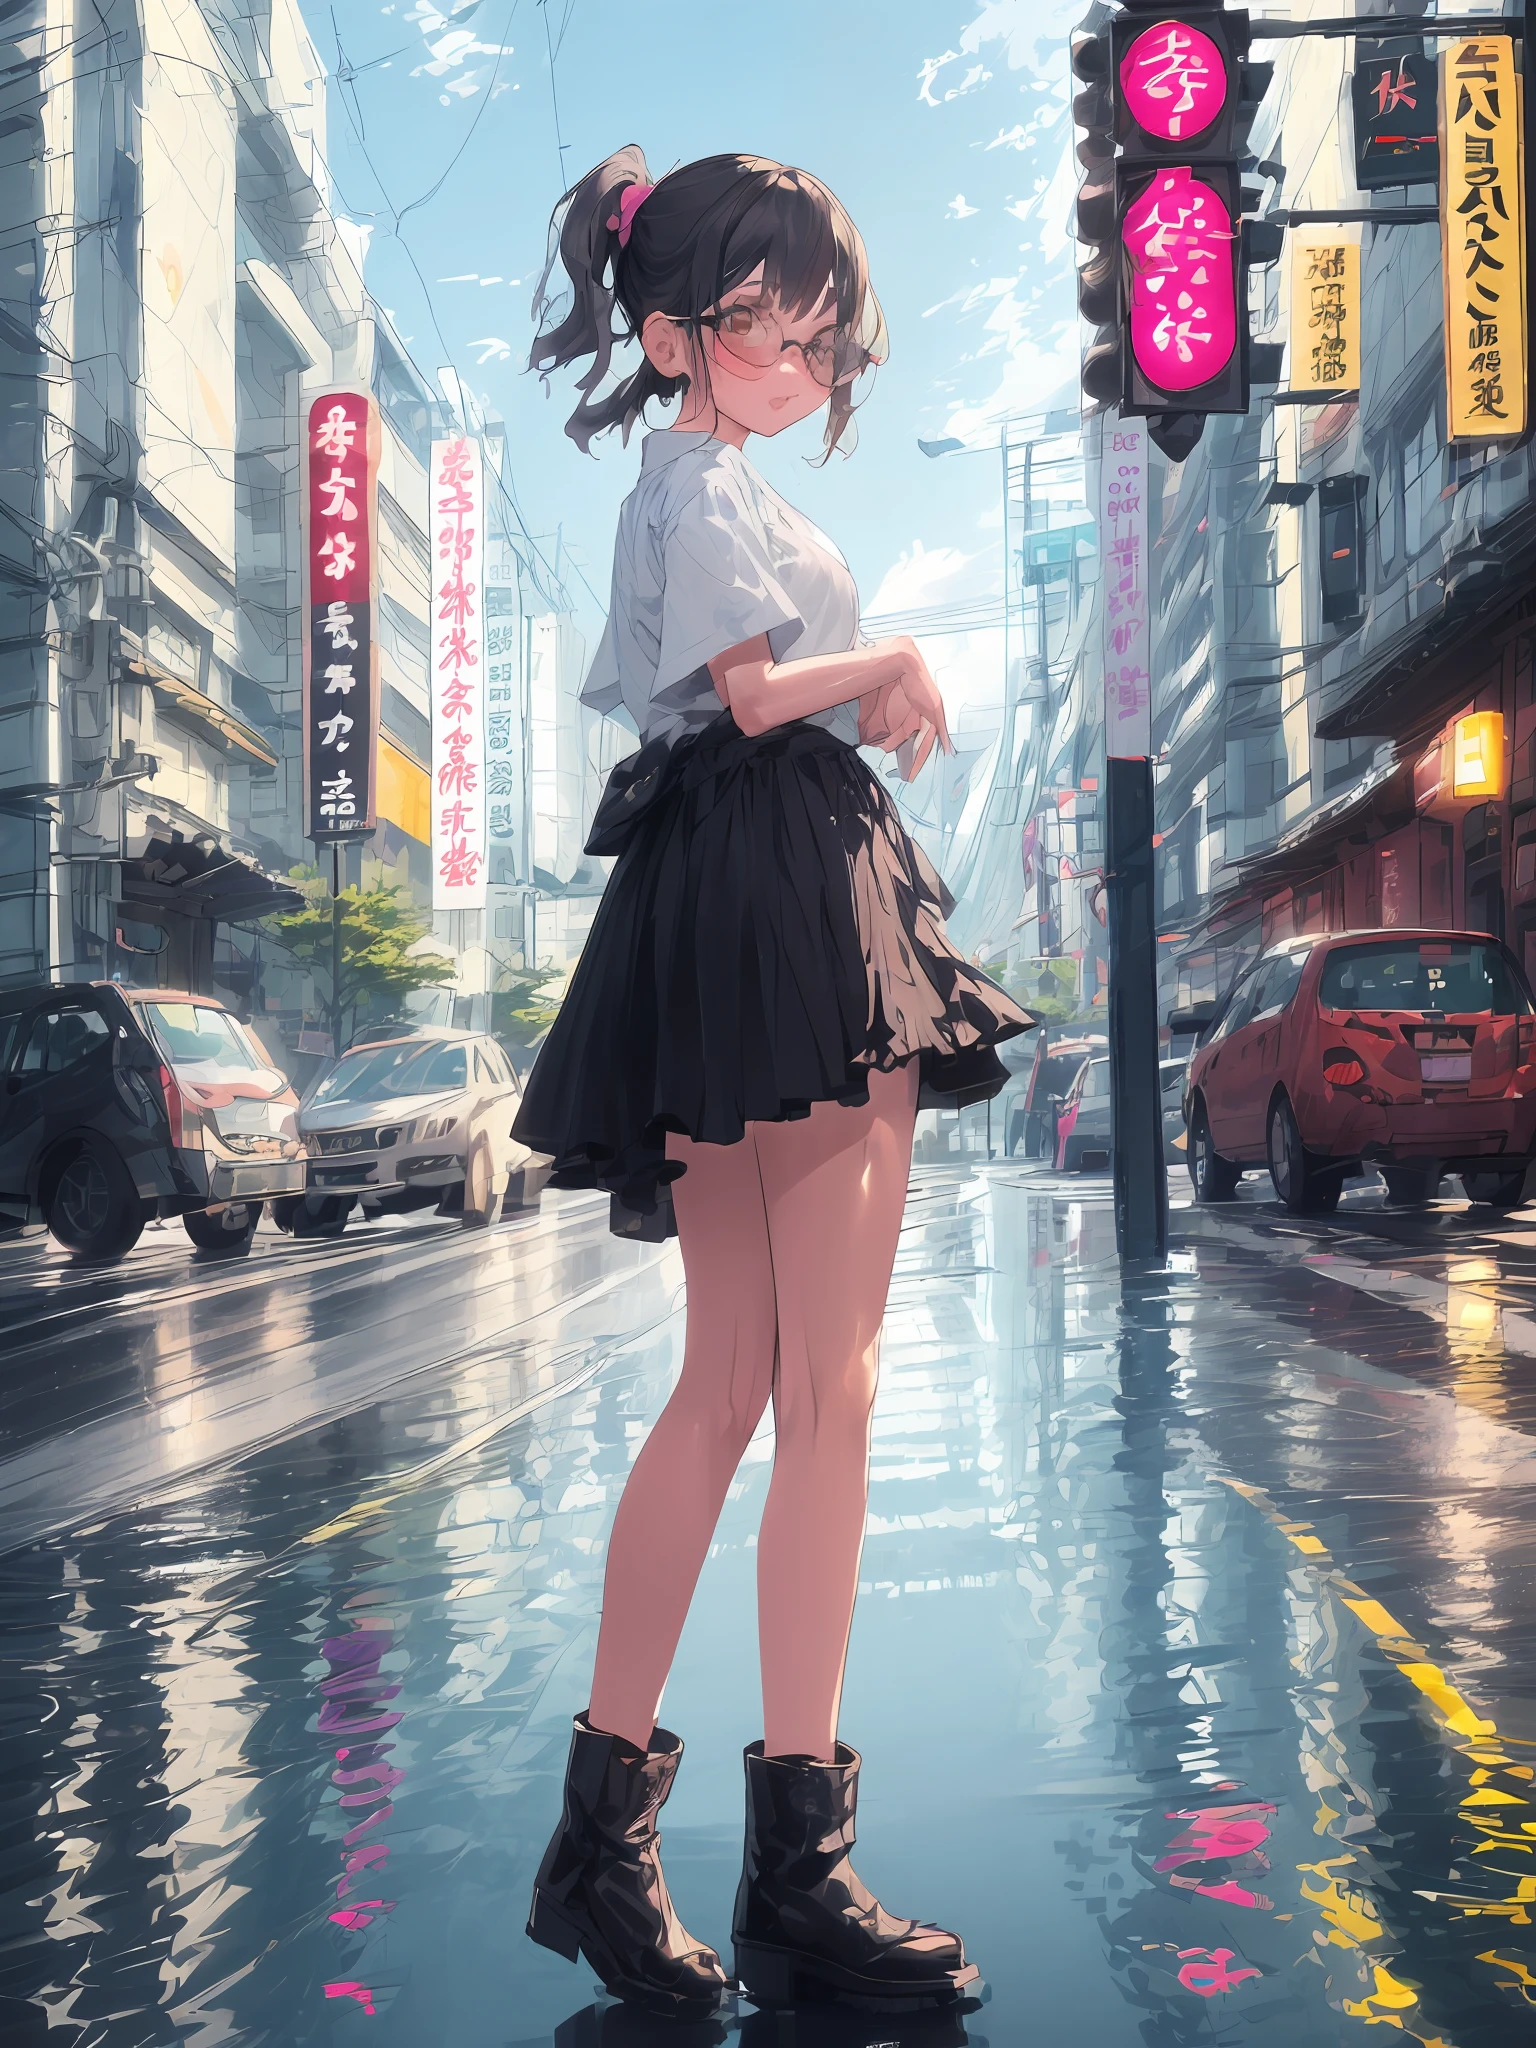 Realistic, intricate details, perfect lighting, pretty face, delicate, female, glasses, characters, neon street, bare legs, black boots, black skirt, wet street, street reflection neon lights, cloudy days, dark clouds, traffic lights flashing yellow lights, intersections, Japanese and Korean painting style, cinematic